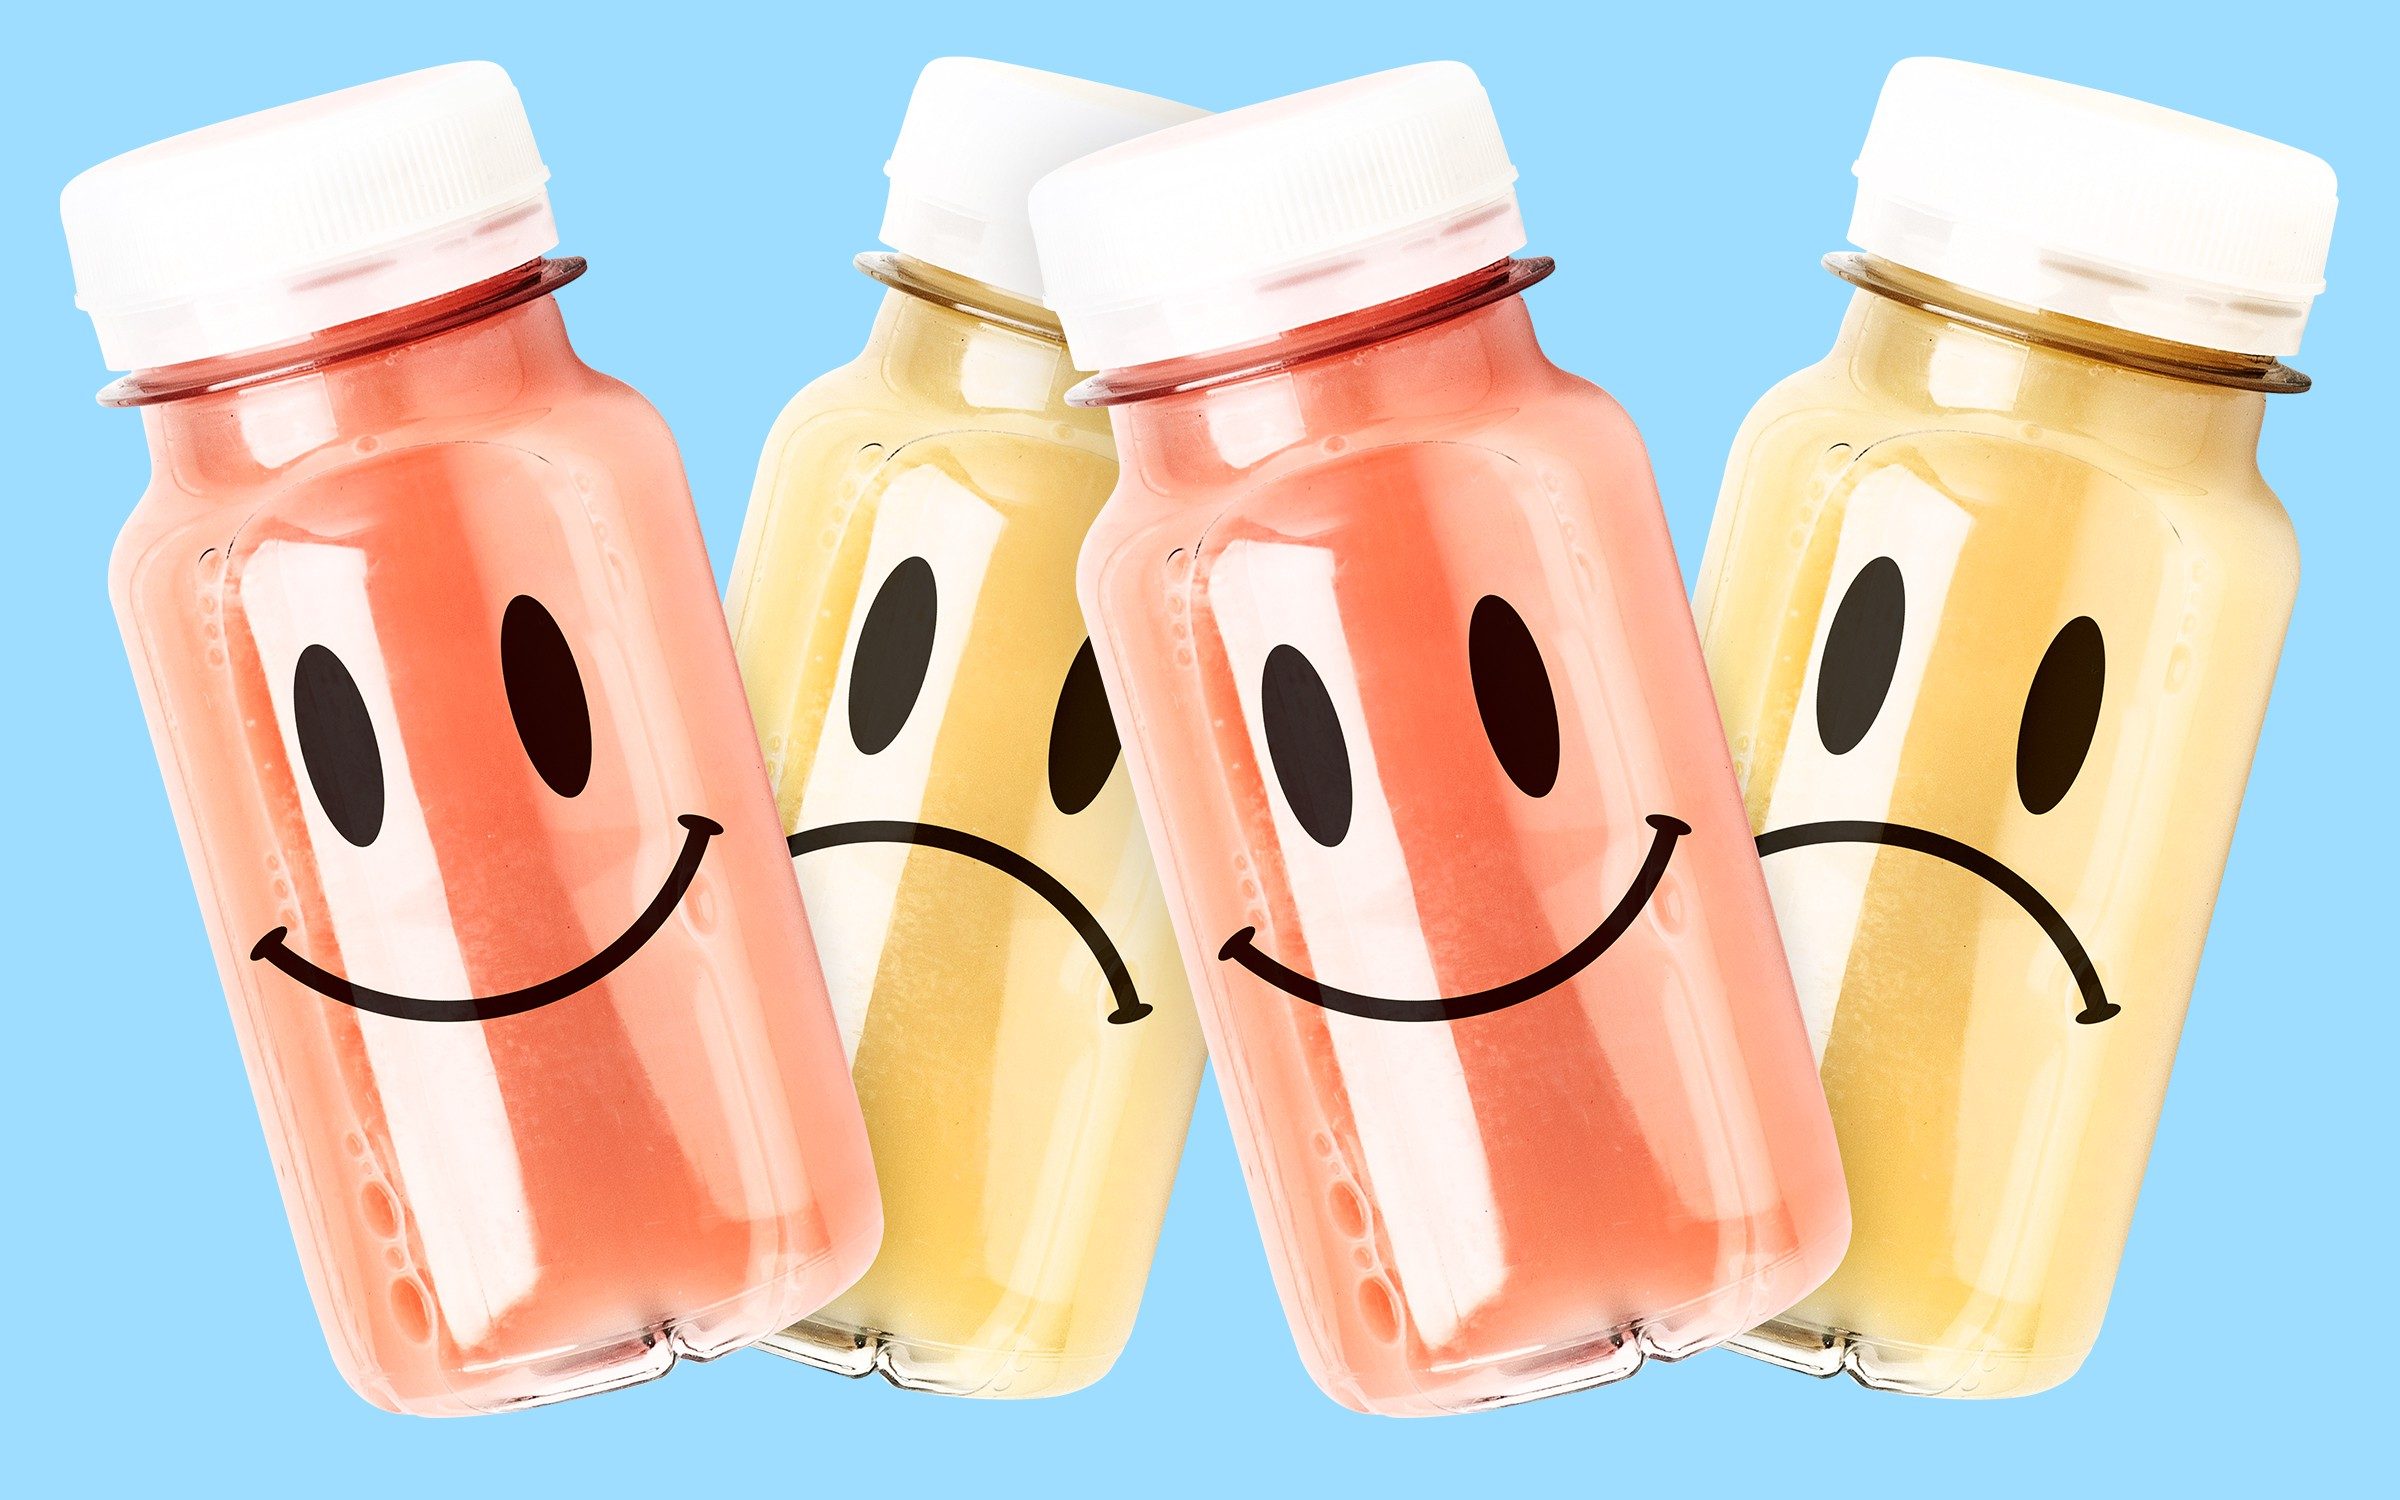 how juice shots became as expensive as champagne